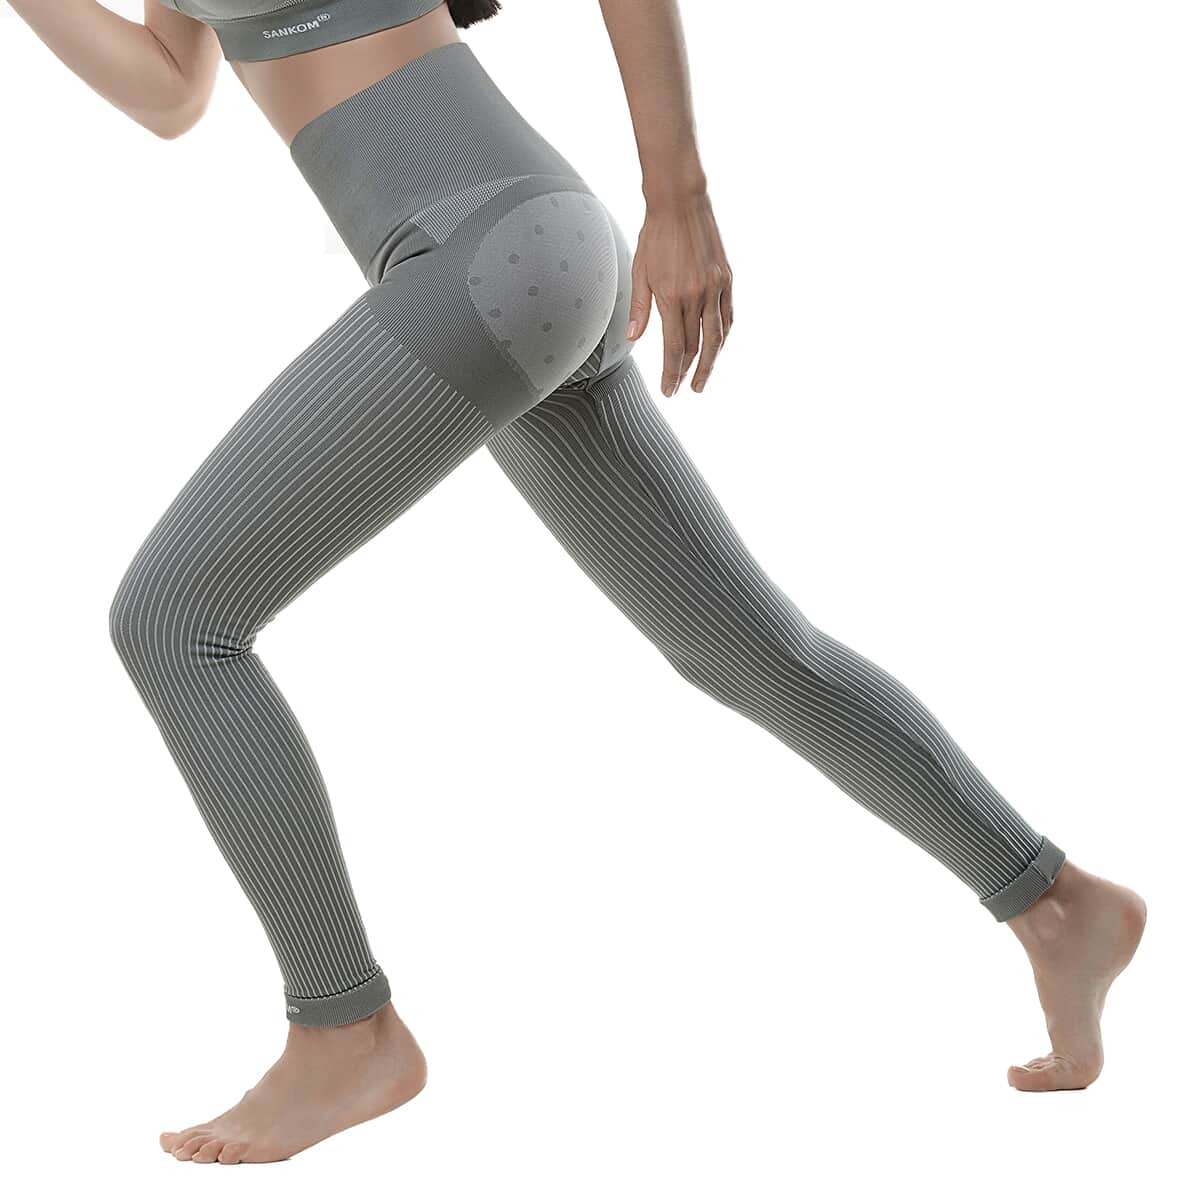 SANKOM Patent Gray Posture And Shaper Leggings For Women With Bamboo Fibers - XS/S image number 3